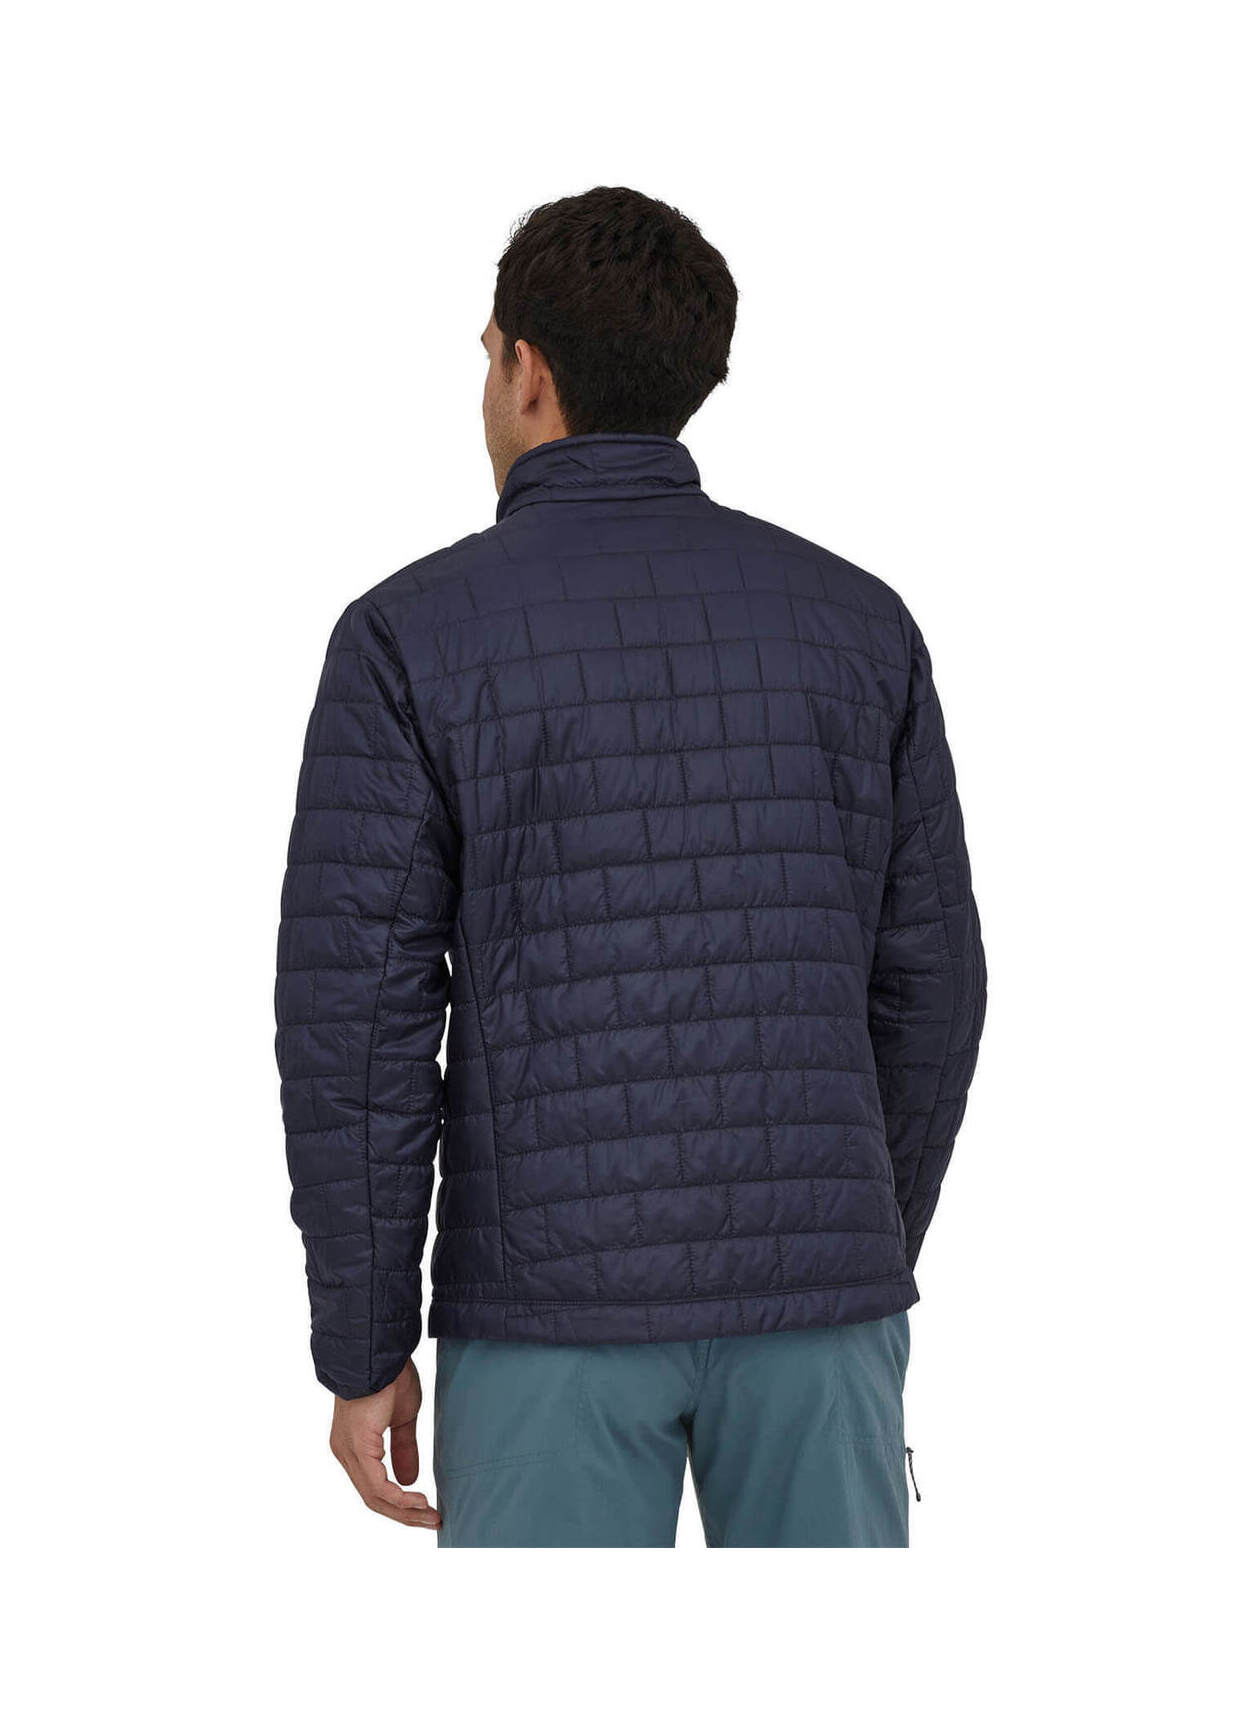 Personalized Patagonia Nano Puff Jacket Men's Classic Navy